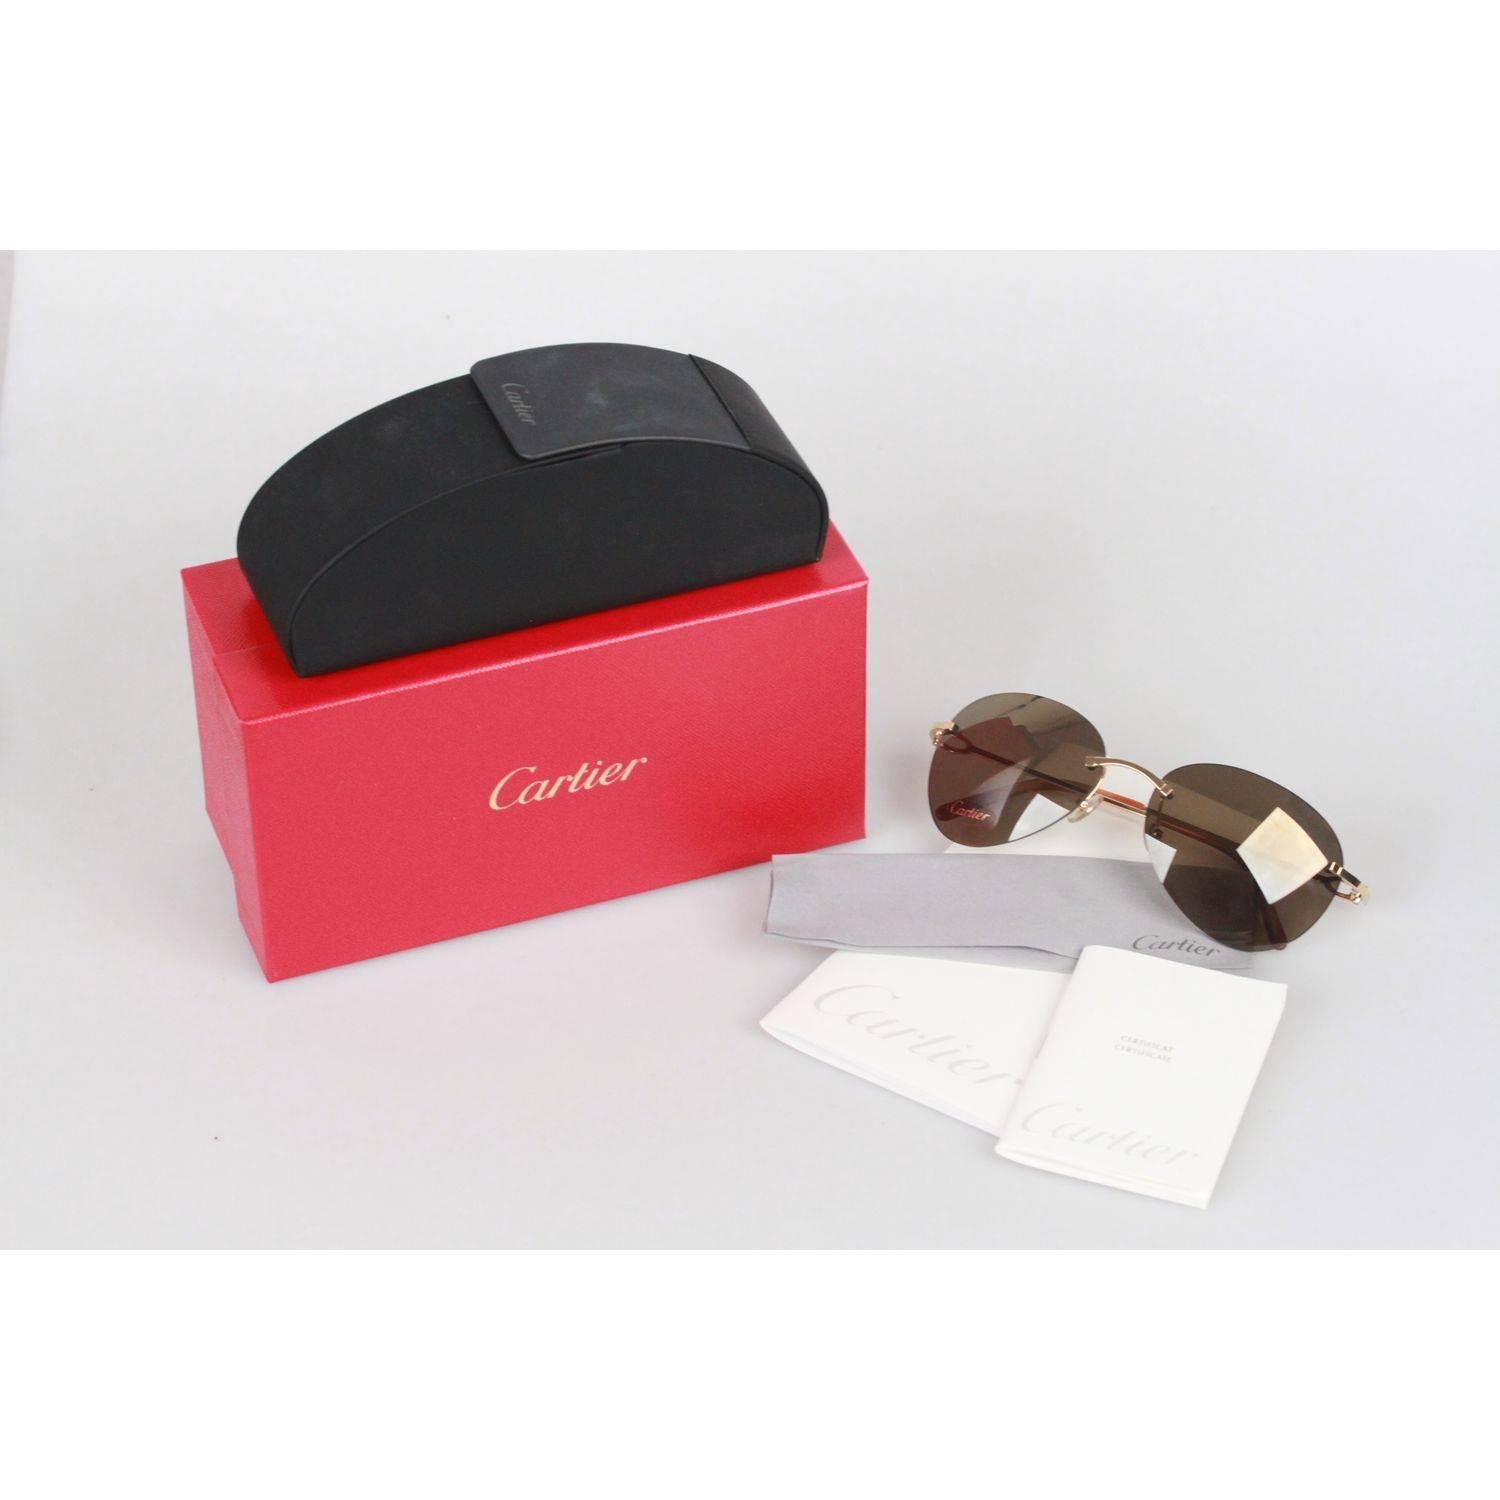 Cartier Rimless Sunglasses
Gold polished frame, with brown havana original Cartier lens
Made in France

Measurements:
- TEMPLE MAX. LENGTH: 135 mm
- TEMPLE TO TEMPLE - MAX WIDTH: 135 mm
- EYE / LENS MAX. WIDTH: 58 mm
- EYE / LENS MAX. HEIGHT: 46